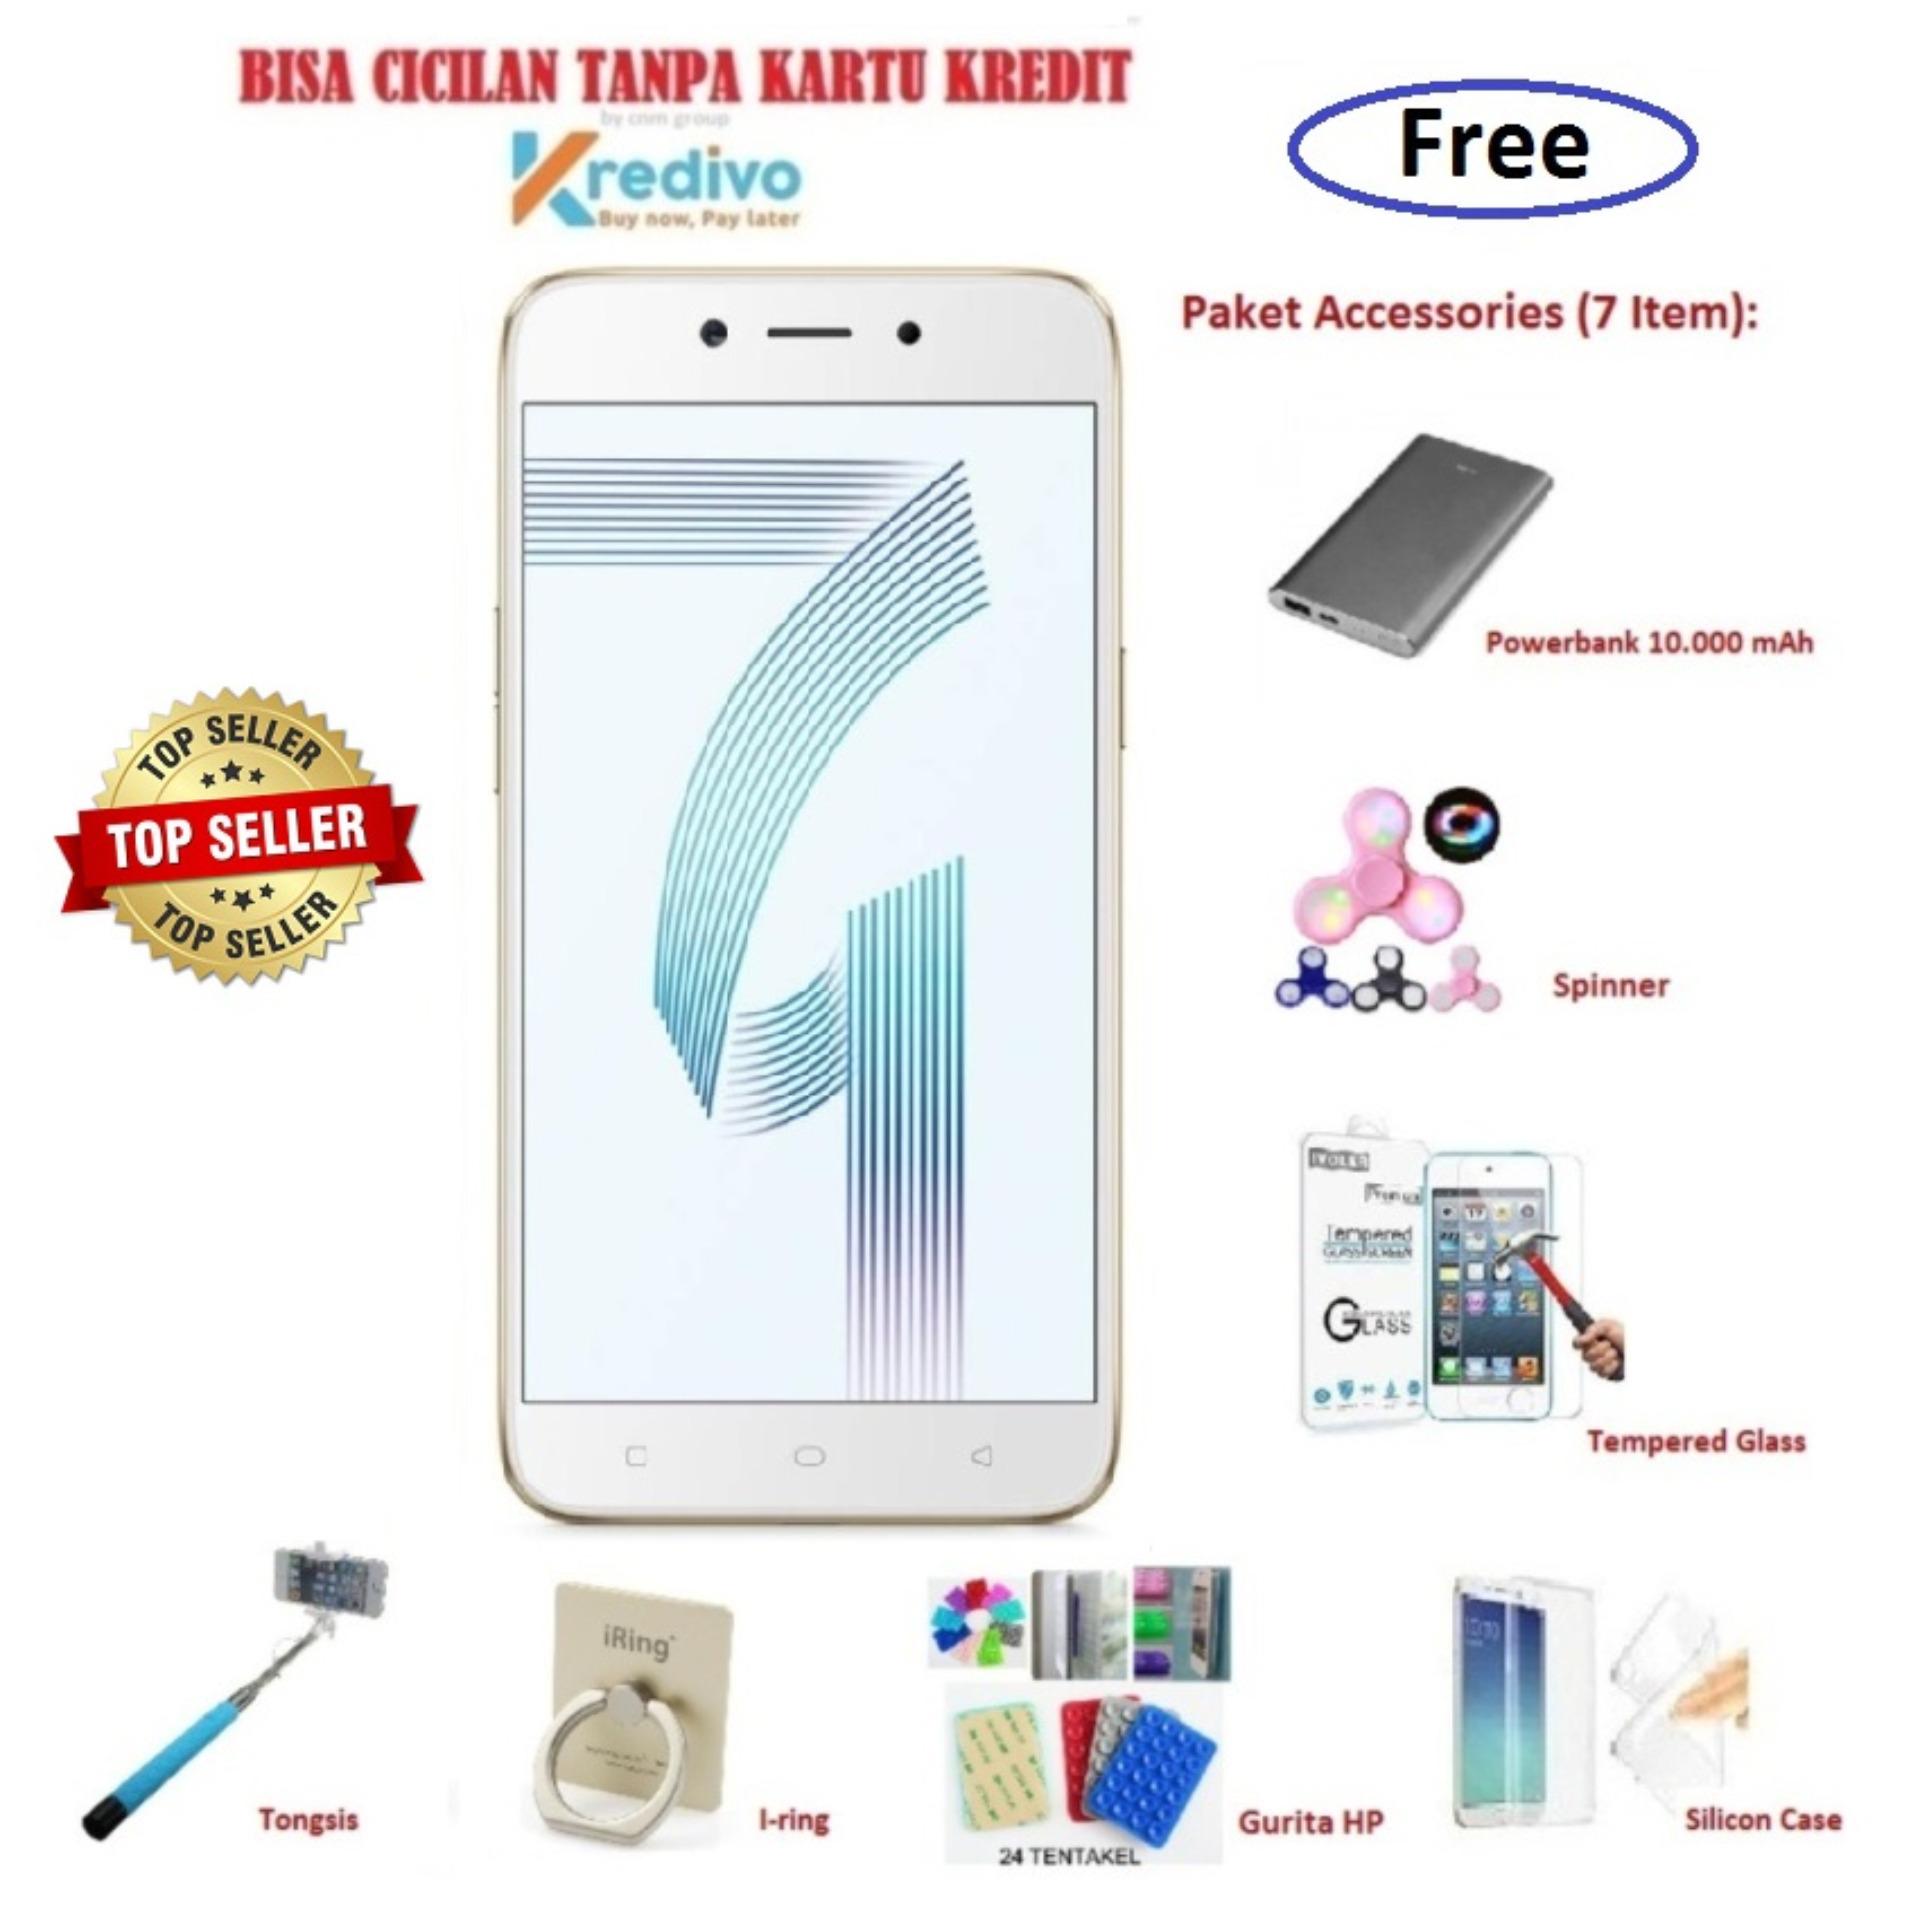 Oppo A71 2/16GB - Free 7 Acc